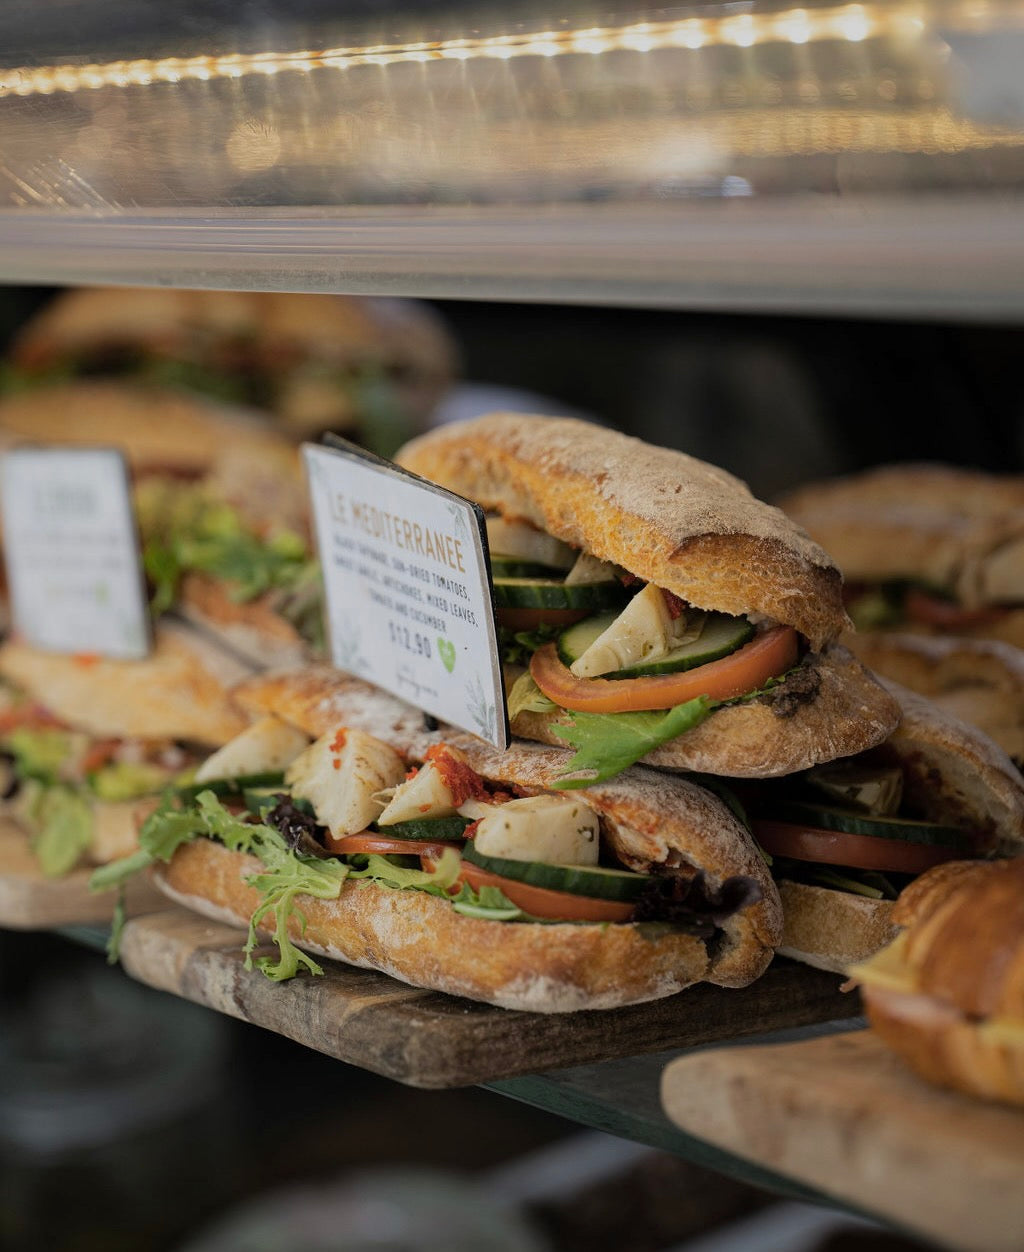 The Olive Place in Byron Bay offers mouth-watering sandwiches Provencal style